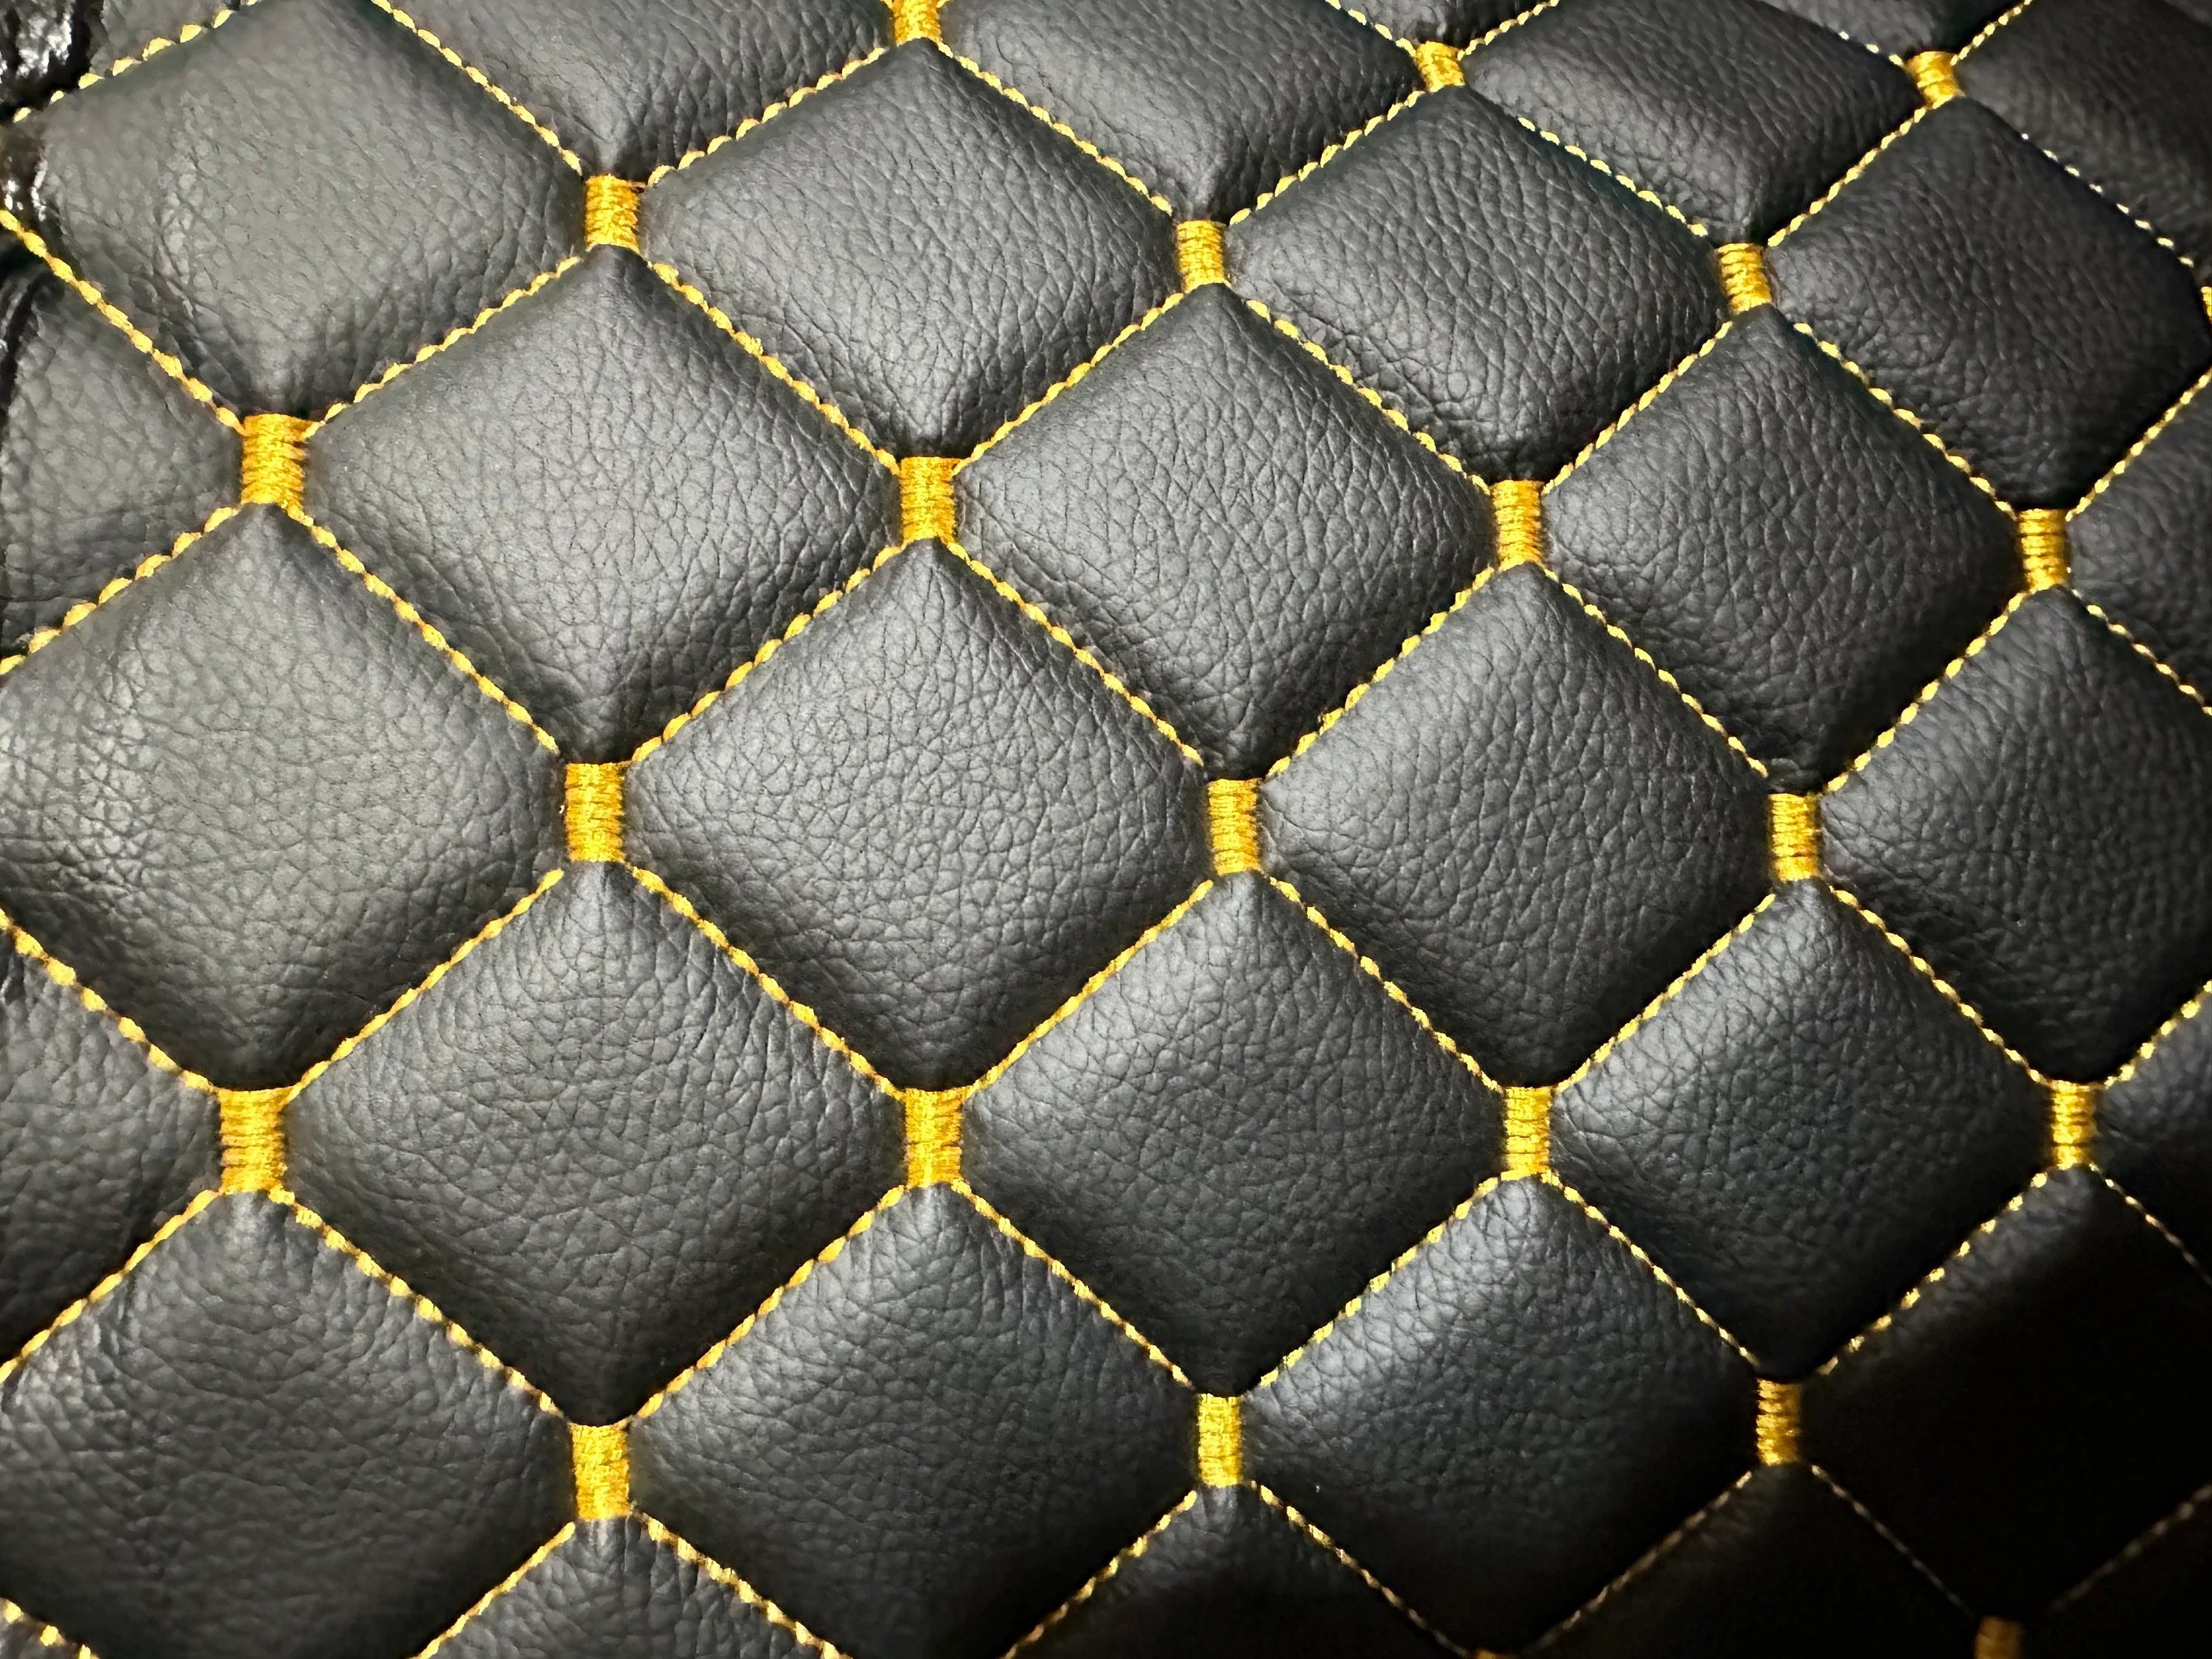 Black Gold Quilted Vinyl Faux Leather Car Upholstery Fabric | 2"x2" 5x5cm Diamond Stitch with 5mm Foam | 140cm Wide | Automotive Projects